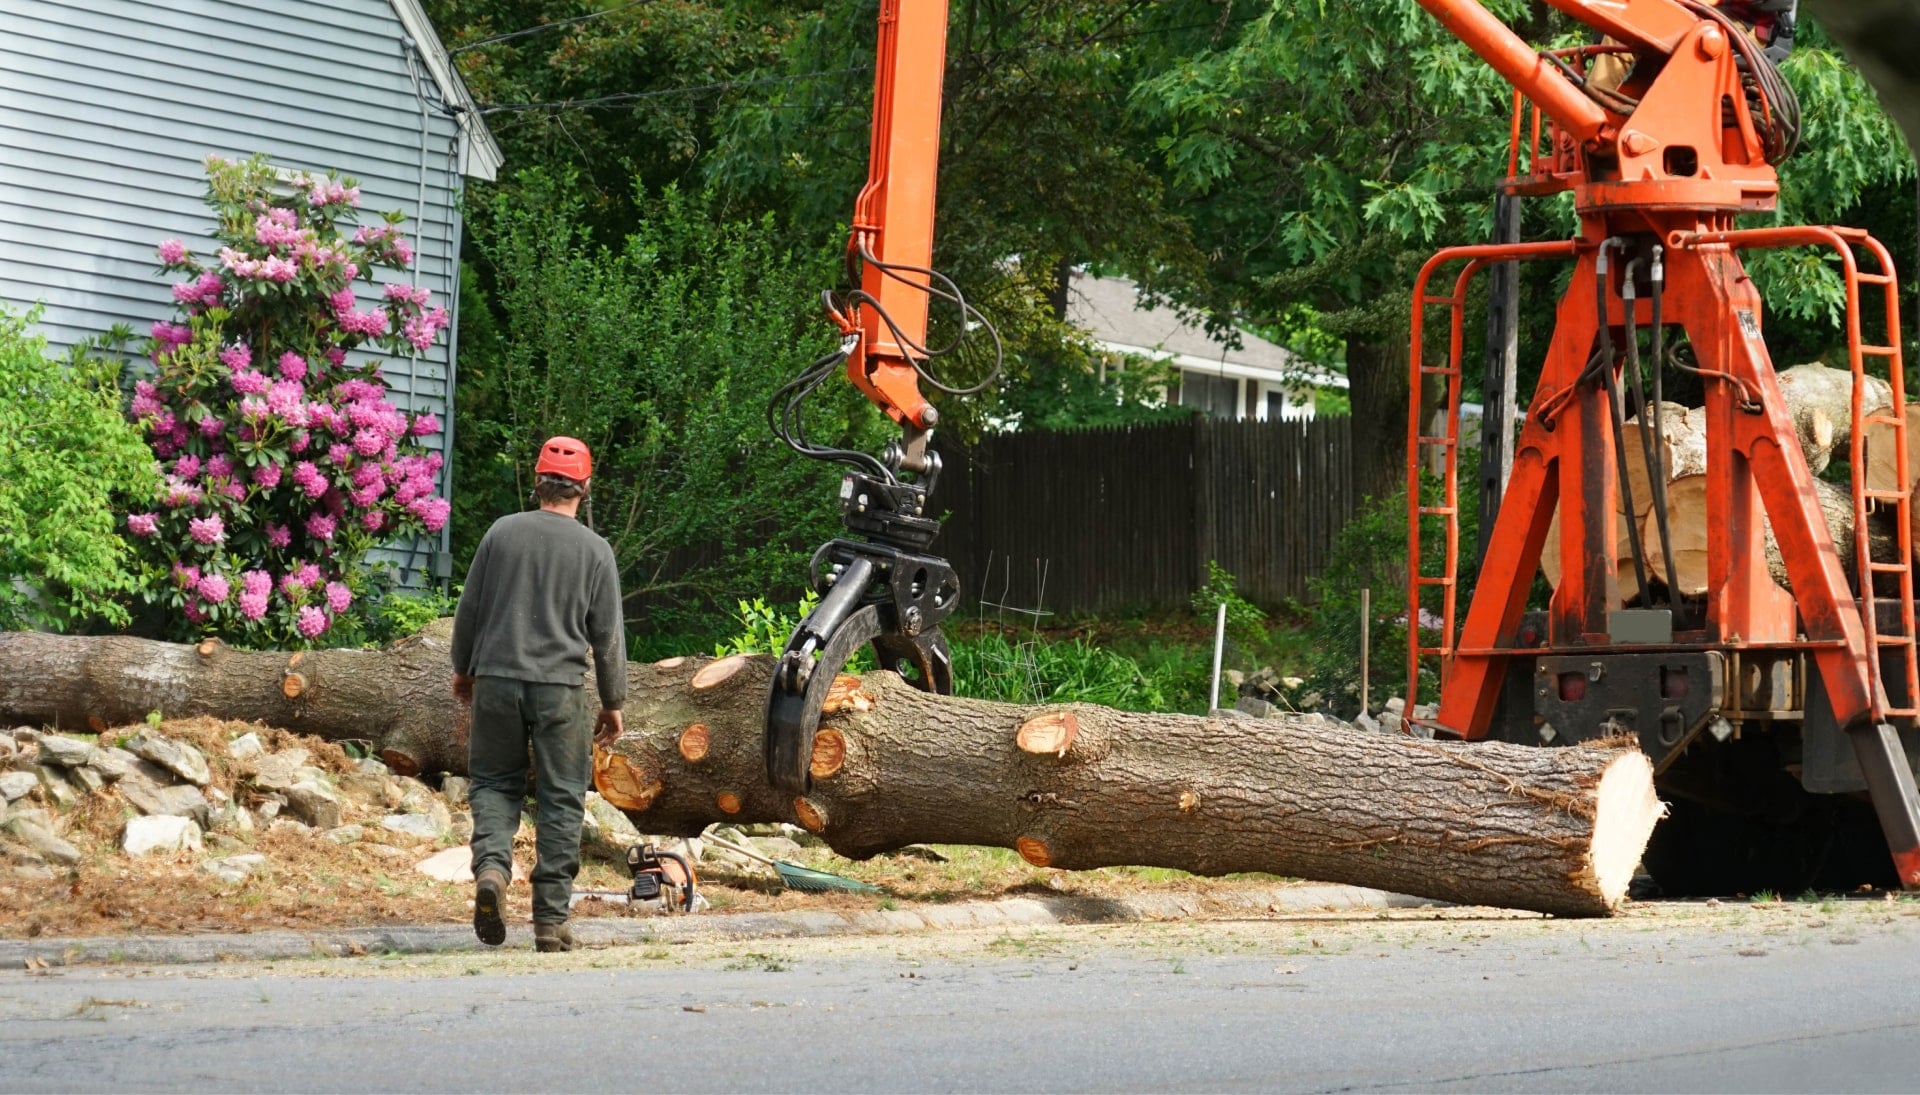 Local partner for Tree removal services in Nampa